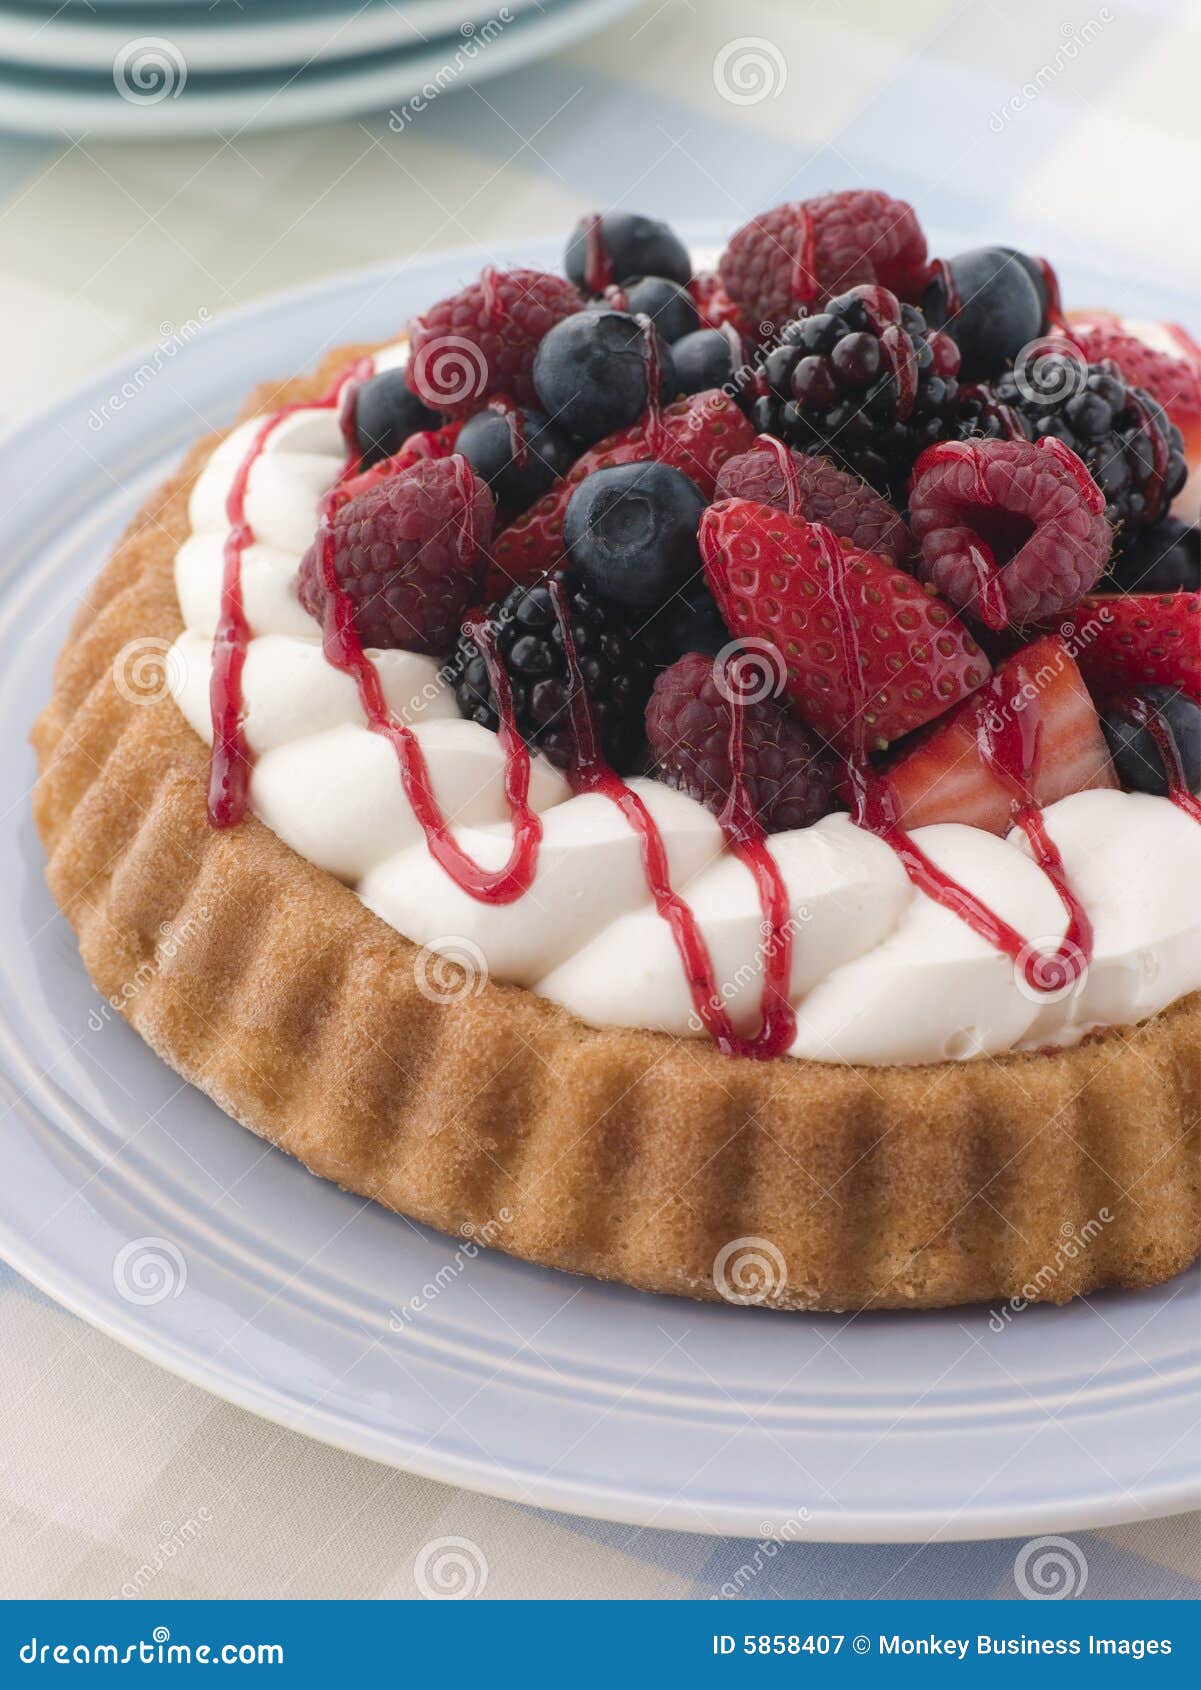 whipped cream and berry sponge flan